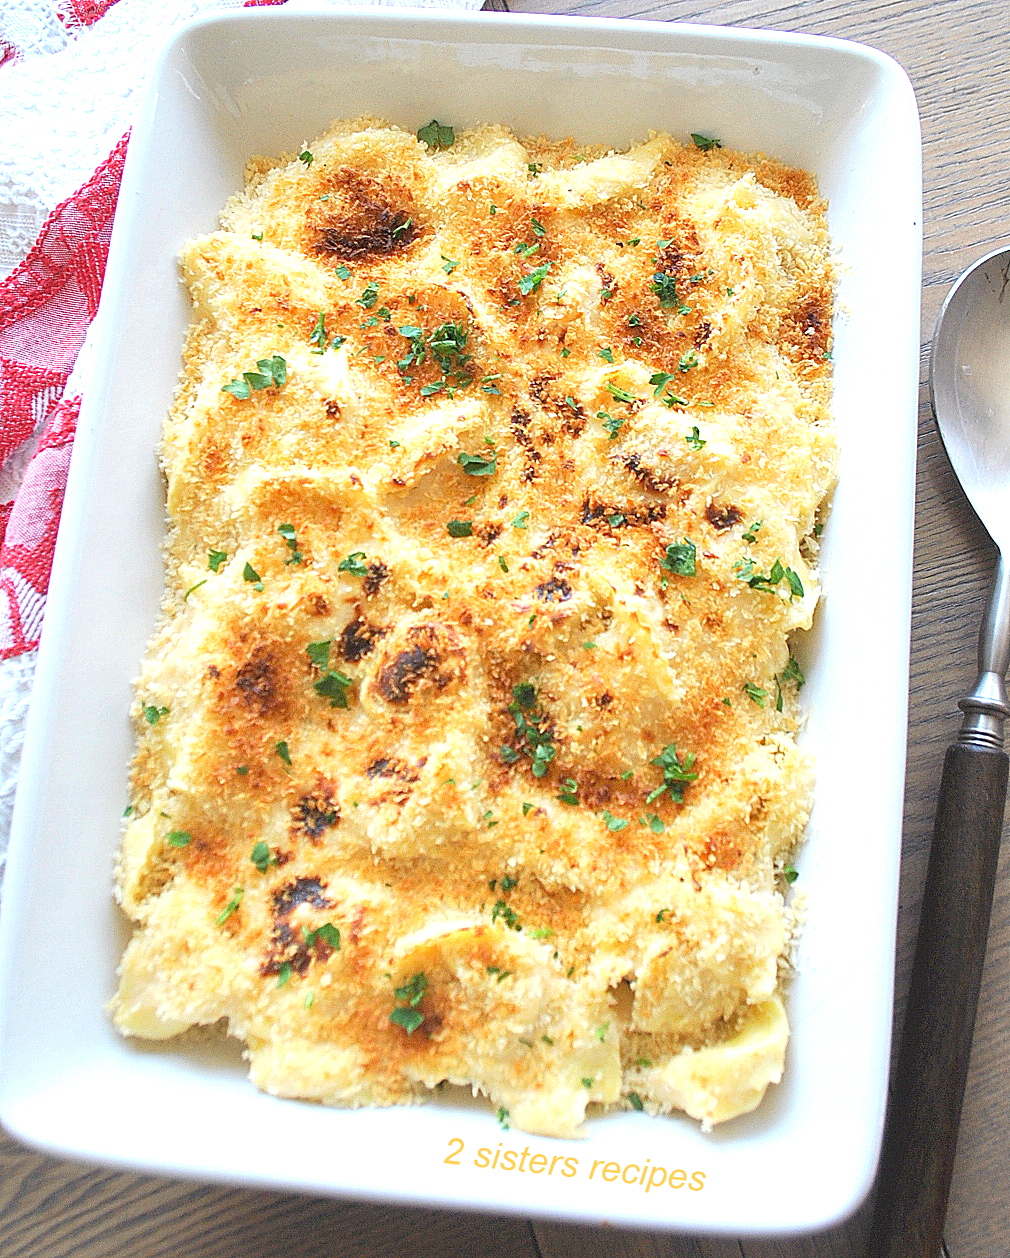 Tortellini Mac and Cheese by 2sistersrecipes.com